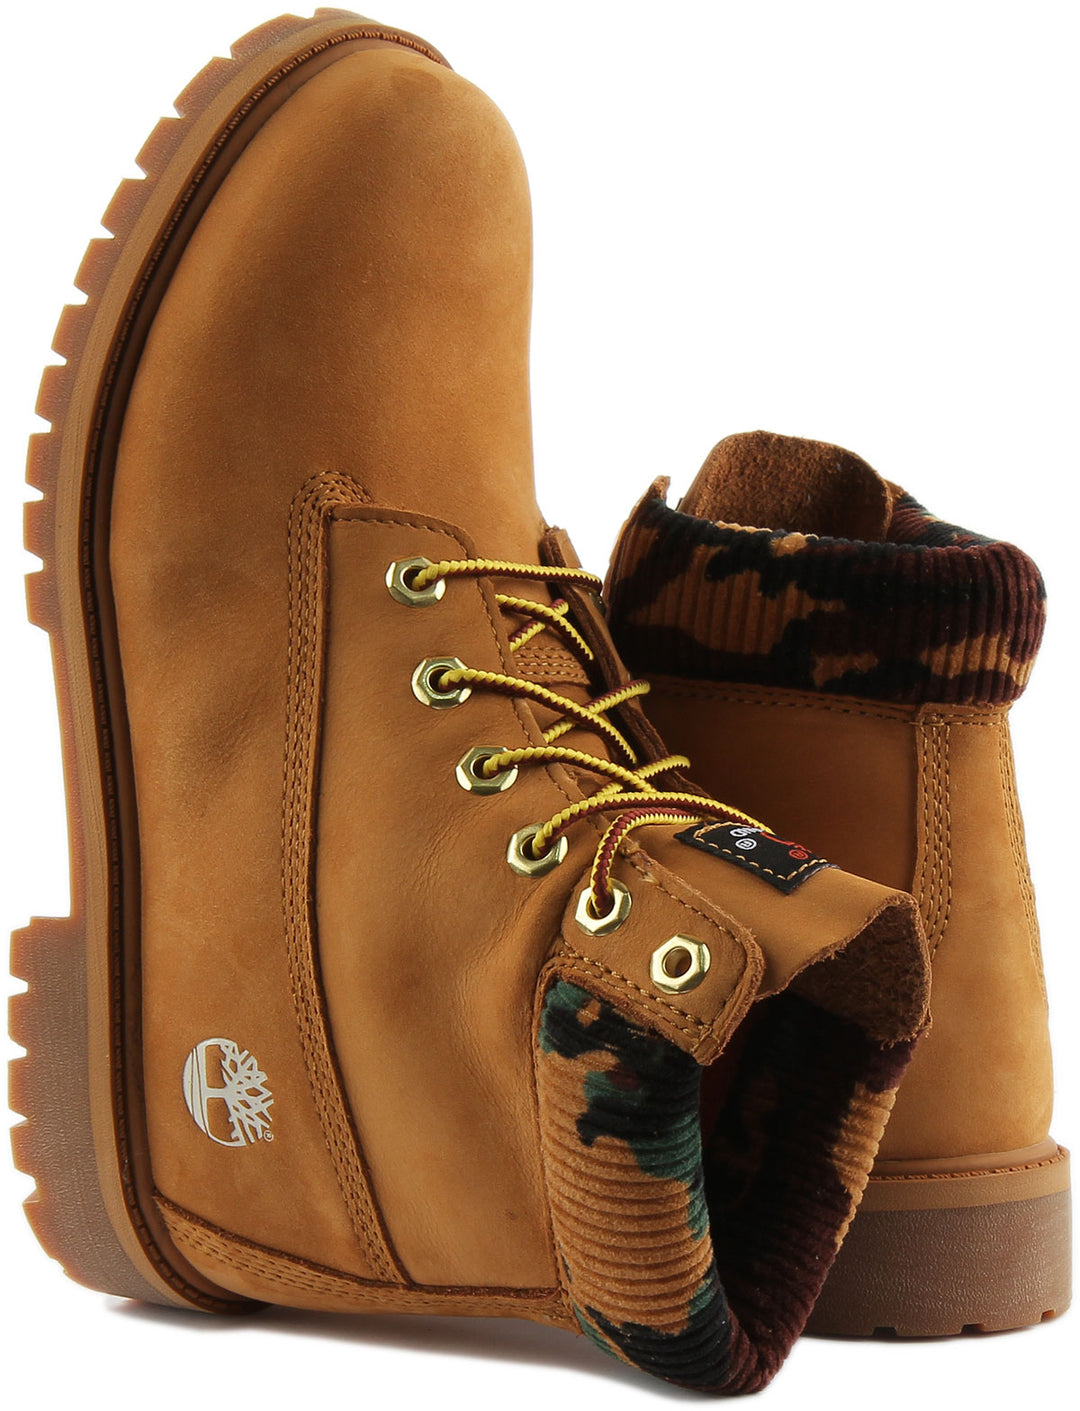 Timberland 6 inch A2Fq3 In Wheat Camo For Junior